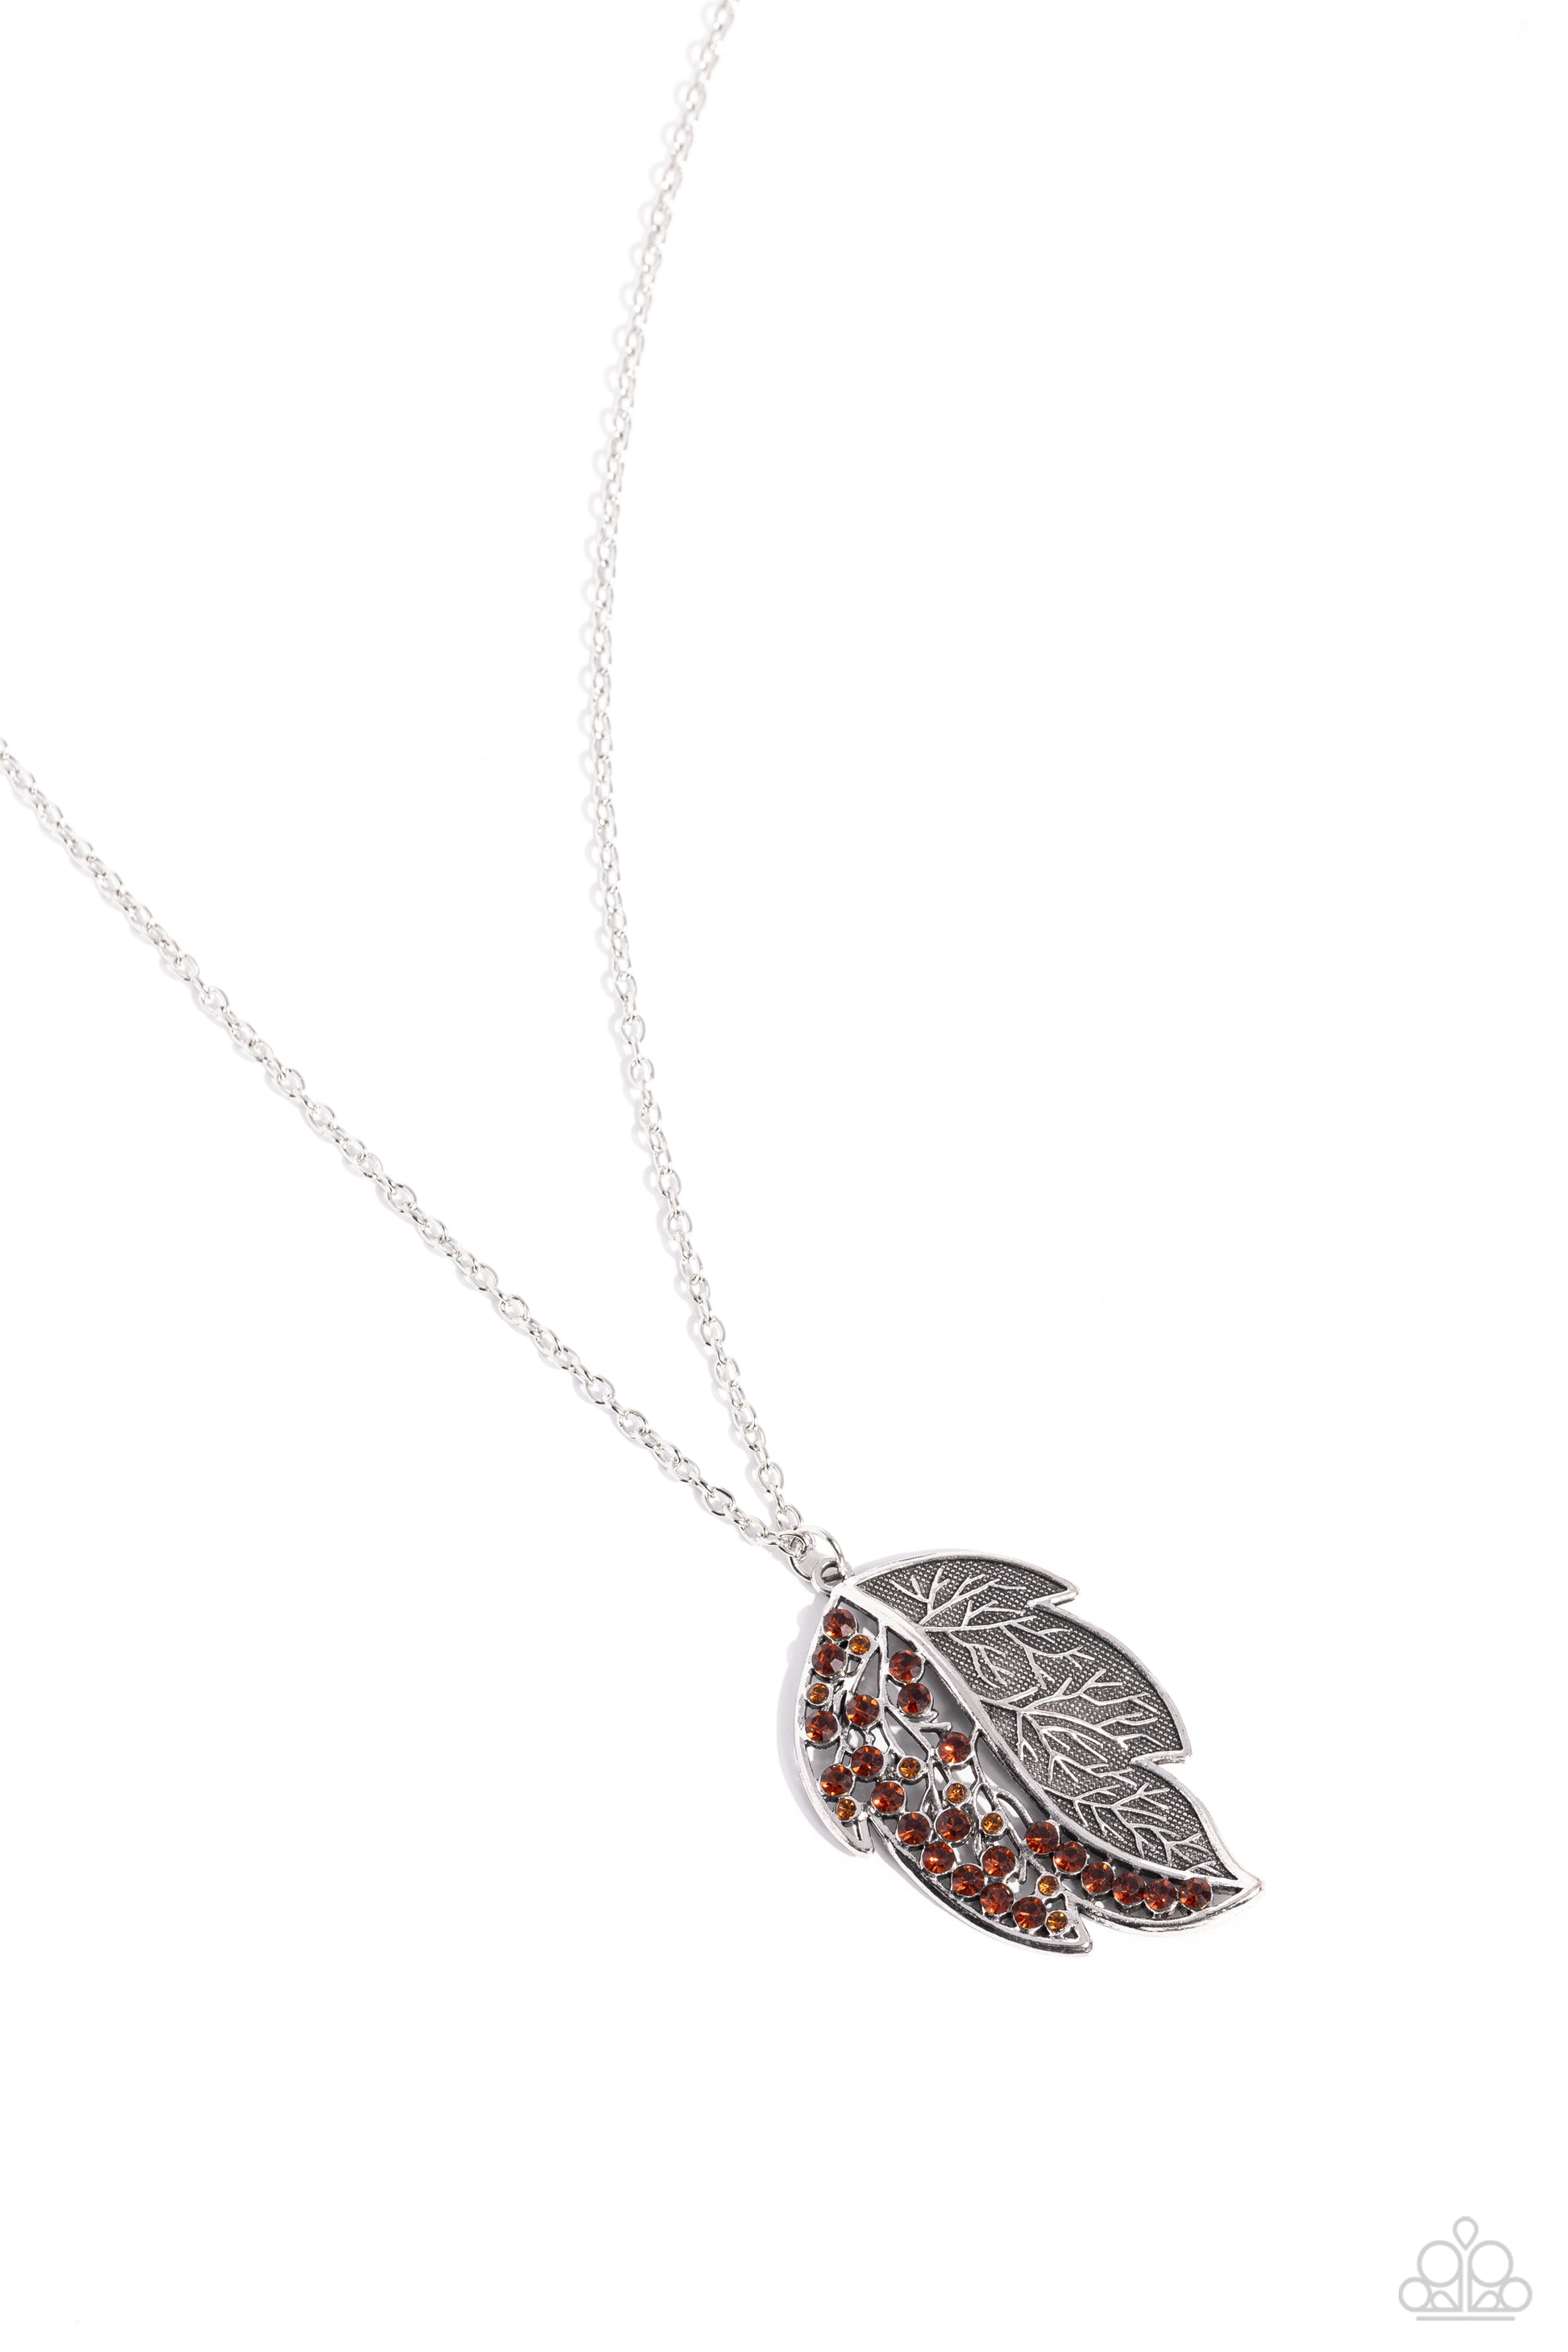 A Mid-AUTUMN Nights Dream Brown Leaf Necklace - Paparazzi Accessories  Half of a lifelike silver leaf frame is adorned in glittering topaz rhinestones as it hangs from the bottom of a lengthened silver chain, creating a simple seasonal sparkle. Features an adjustable clasp closure.  Sold as one individual necklace. Includes one pair of matching earrings.  Sku:  P2RE-BNXX-297XX